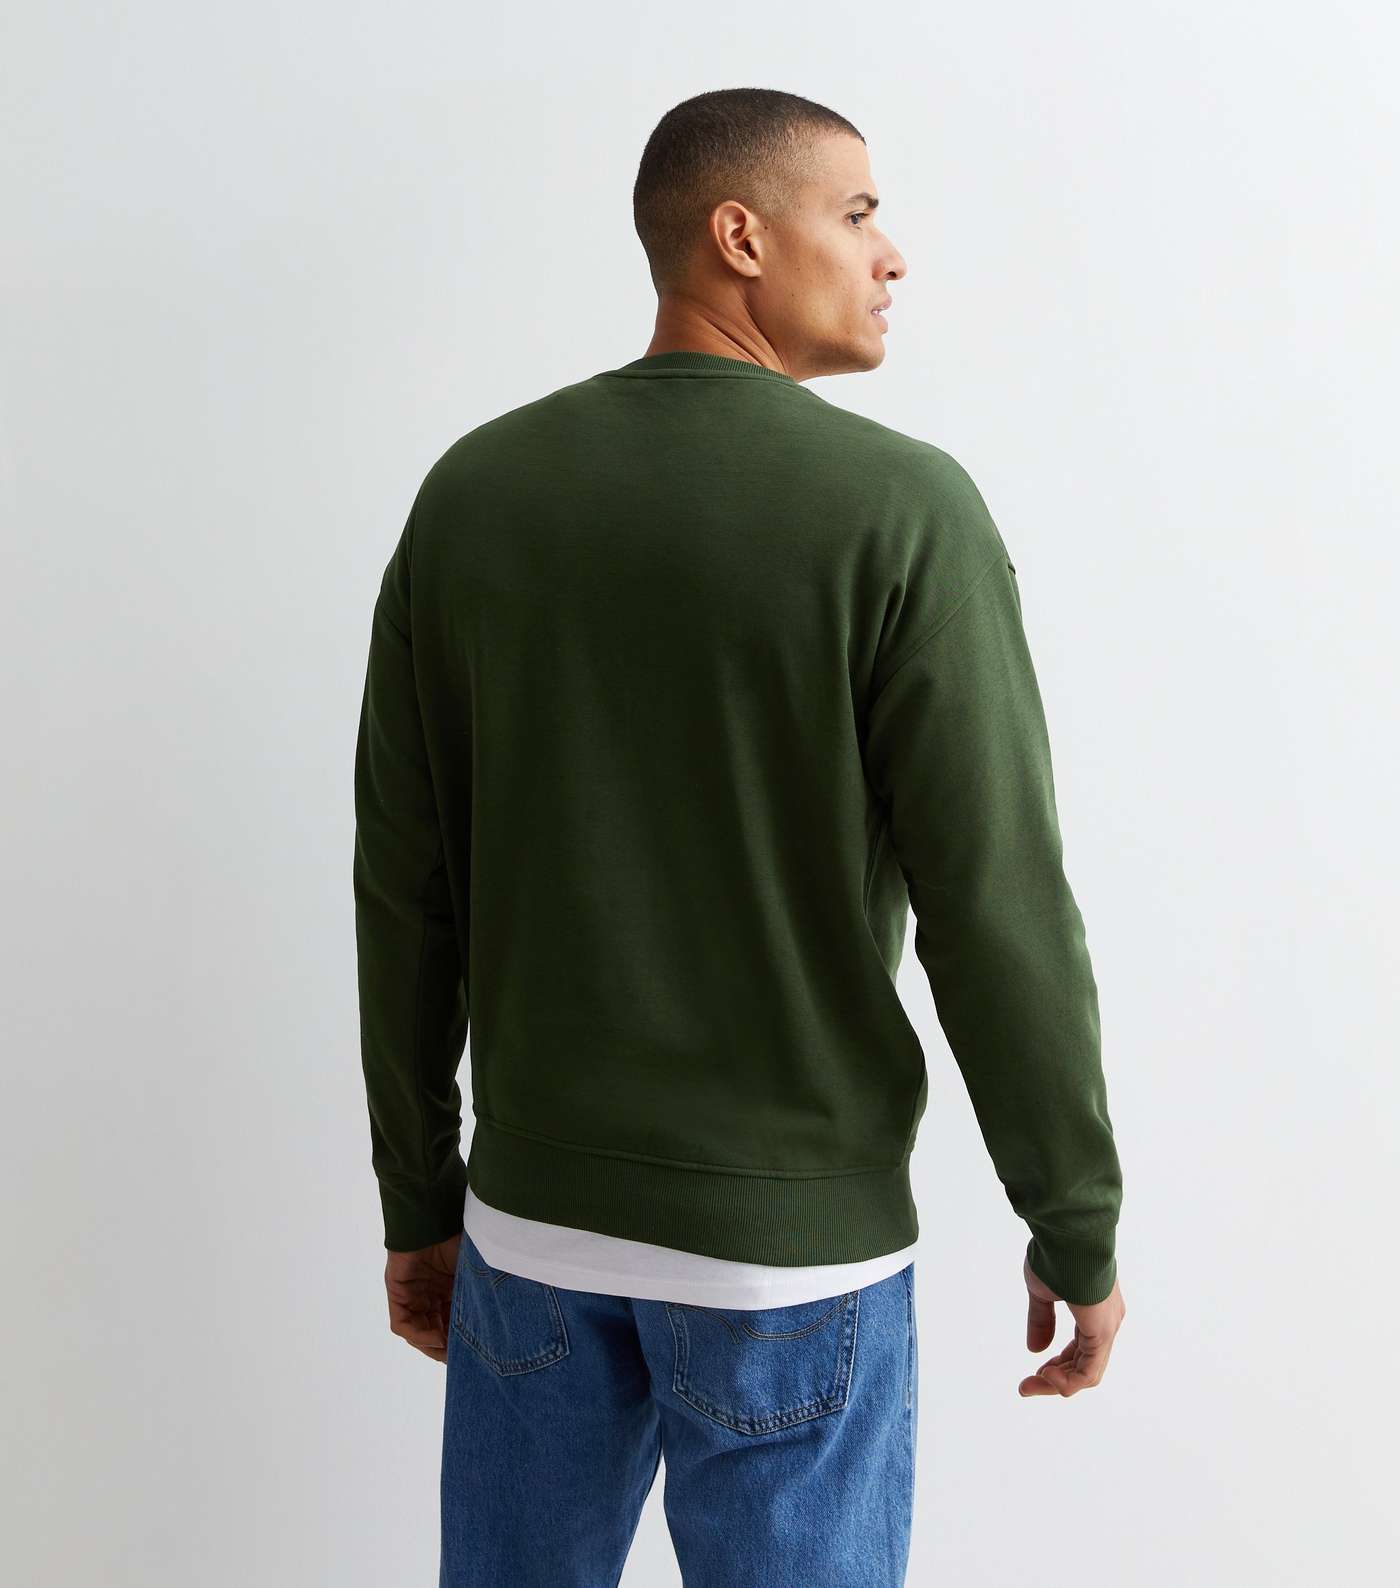 Khaki Mountain Embroidered Crew Neck Relaxed Fit Sweatshirt Image 4